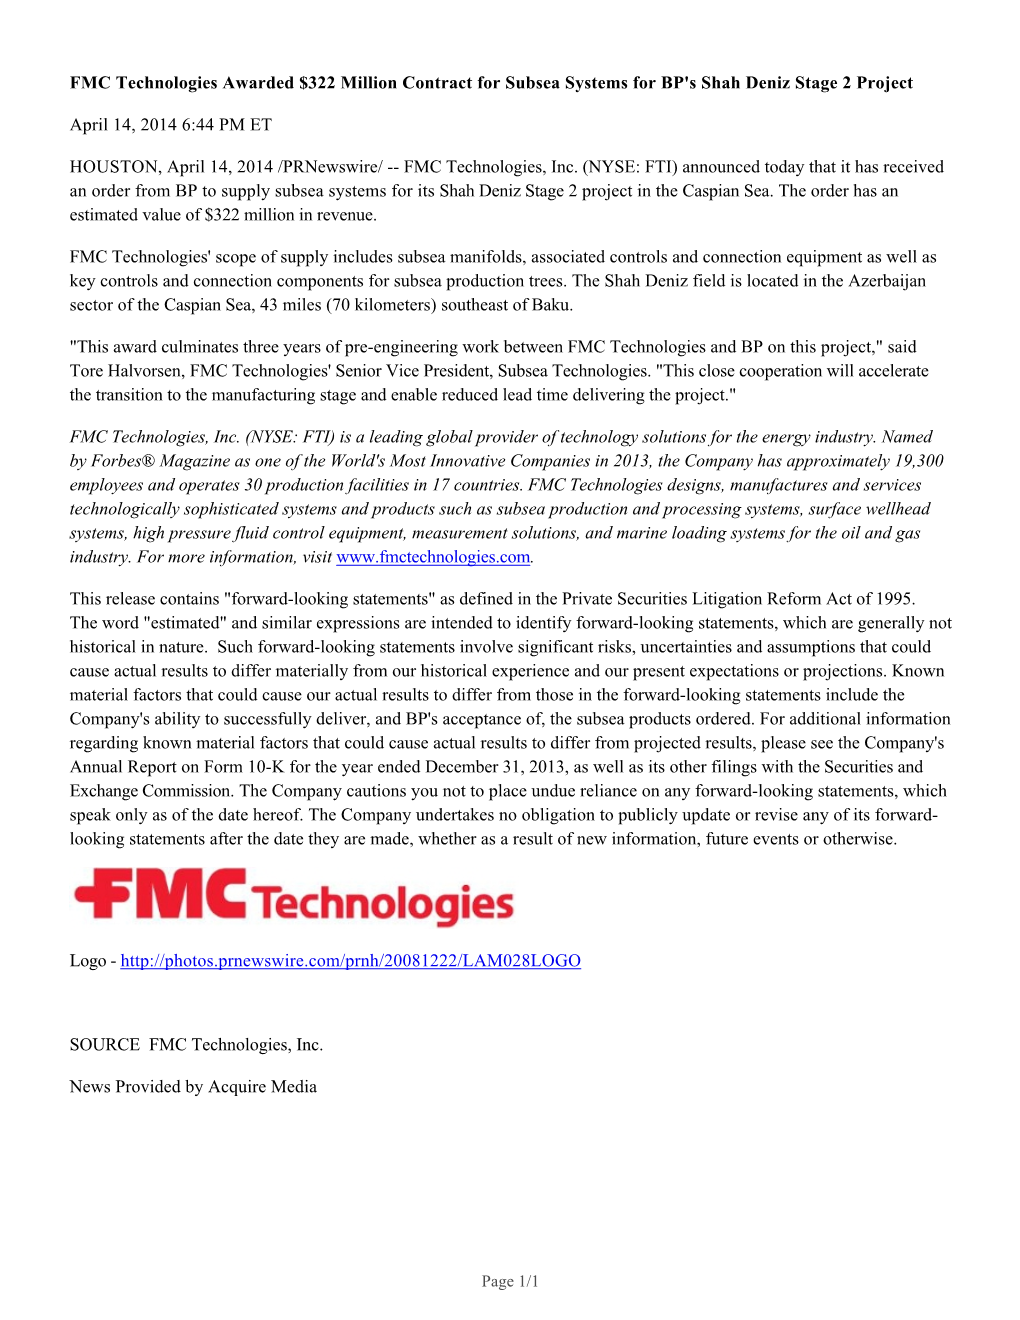 FMC Technologies Awarded $322 Million Contract for Subsea Systems for BP's Shah Deniz Stage 2 Project